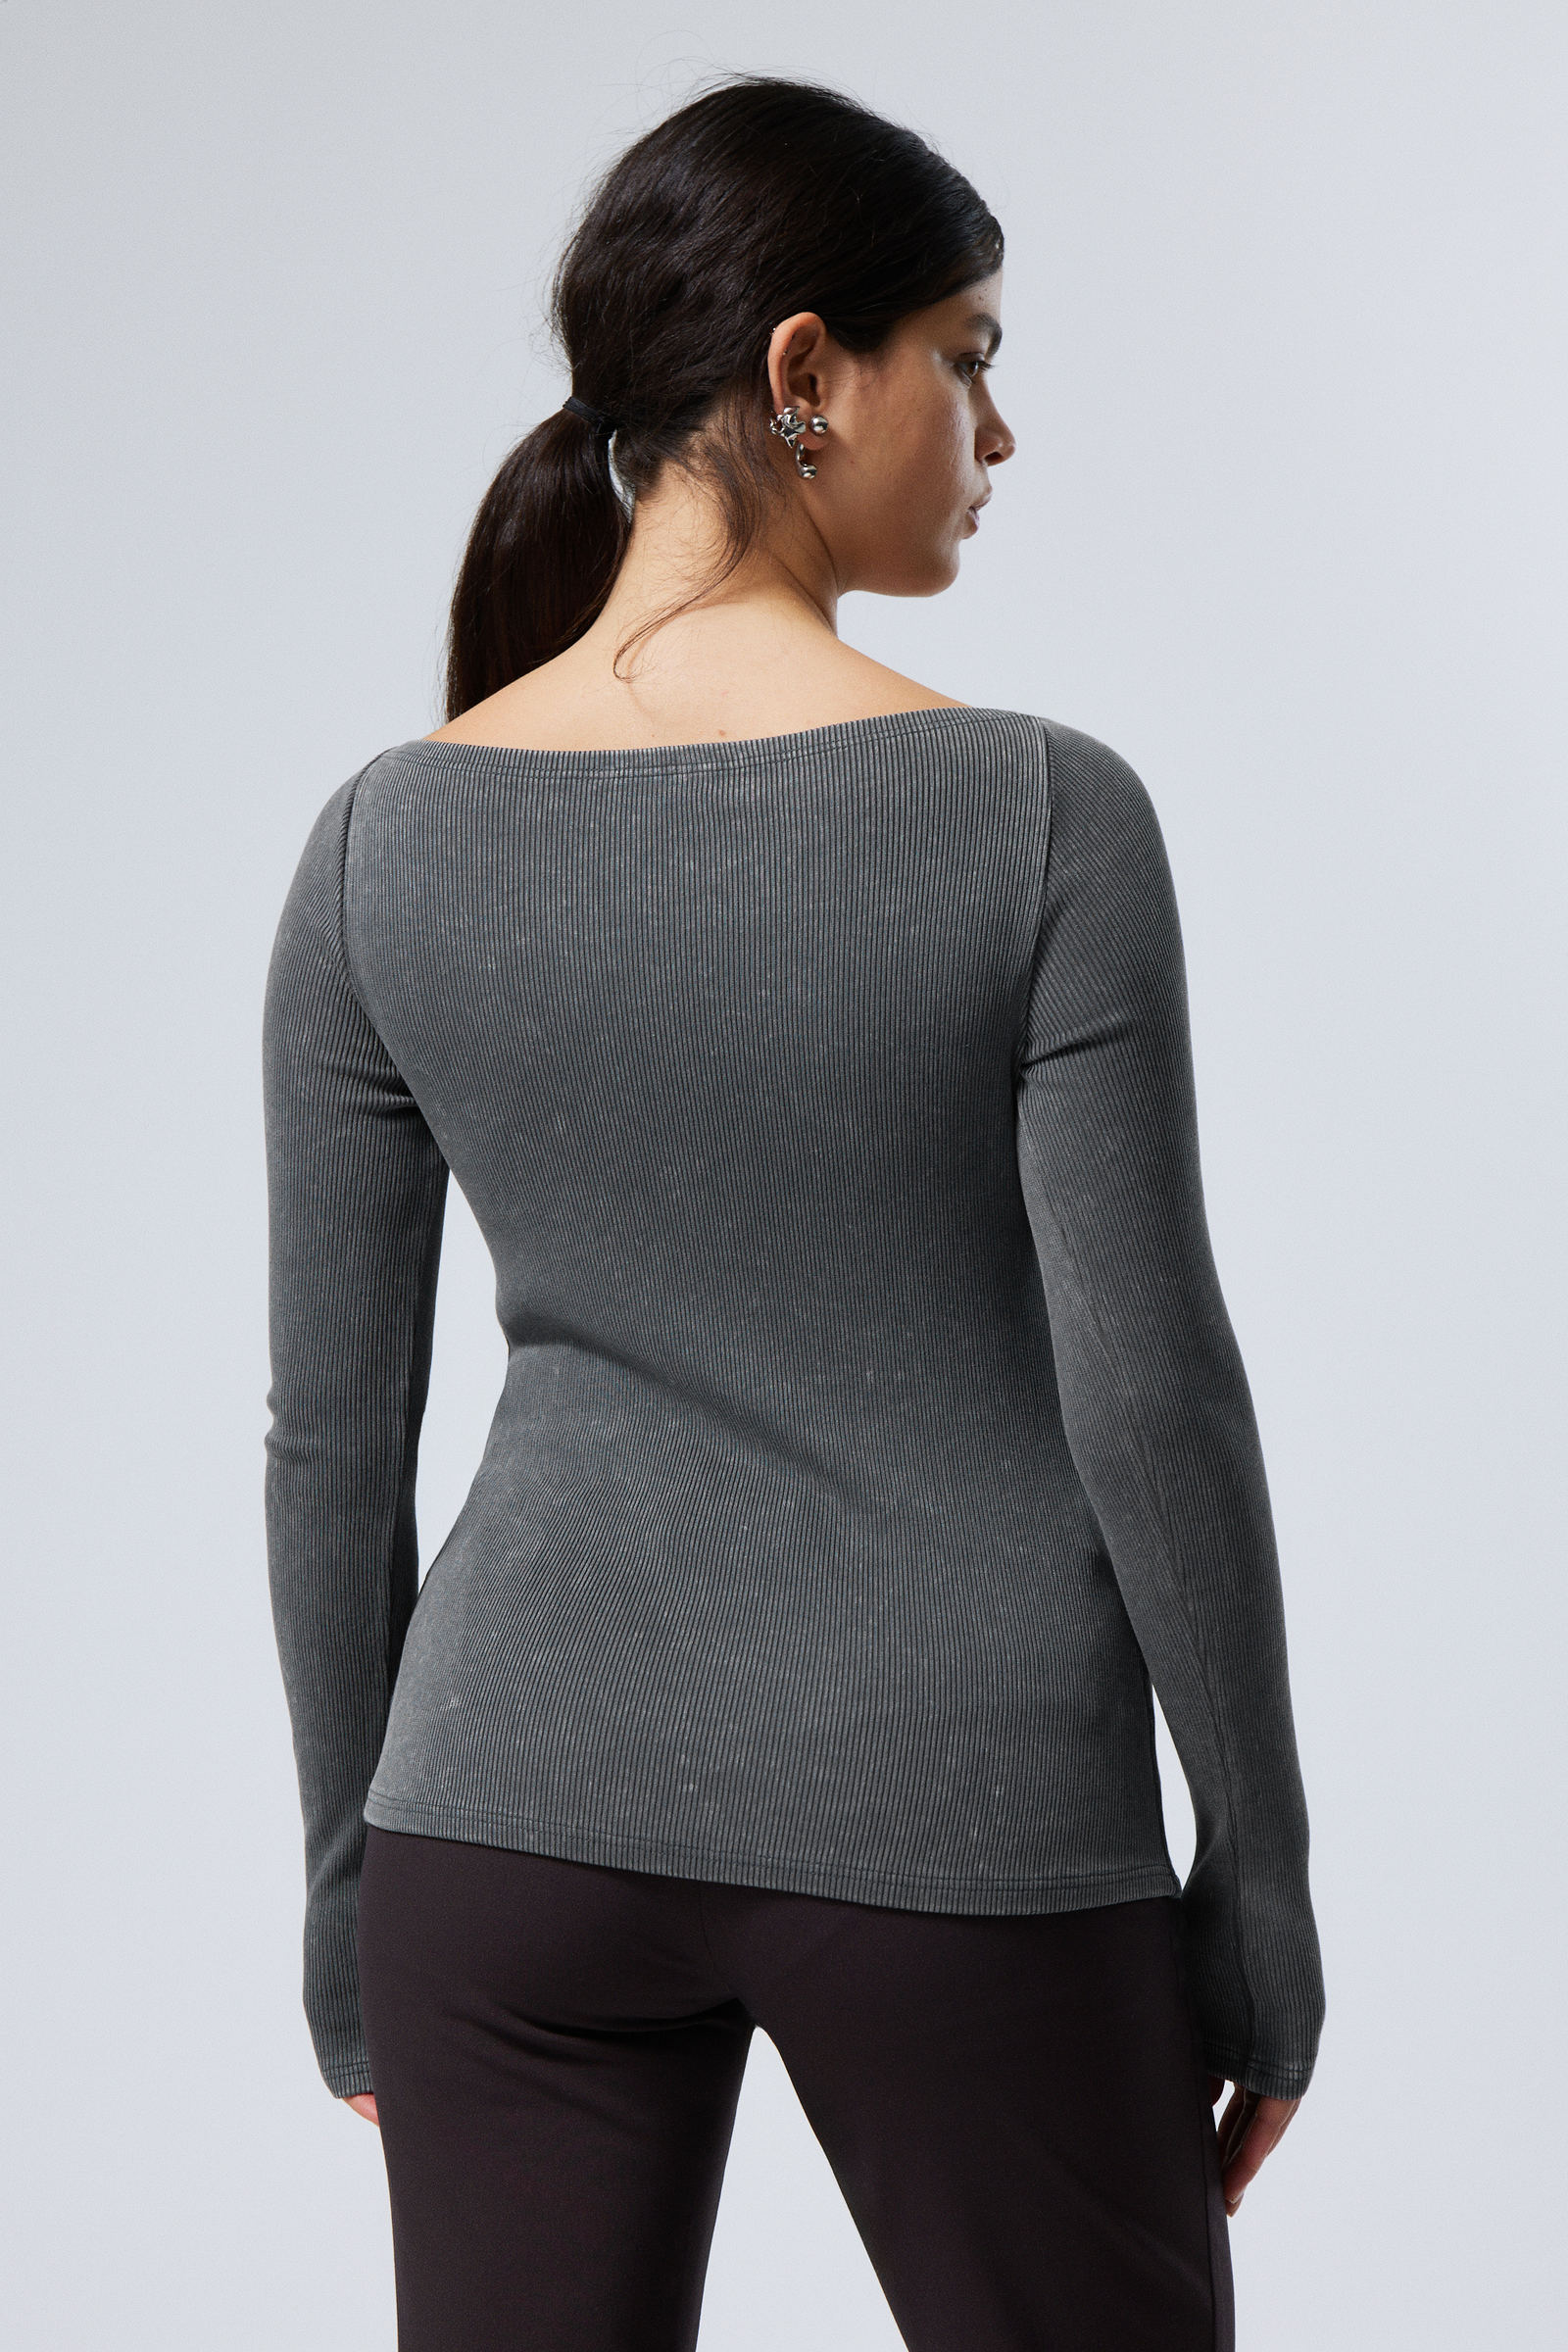 #272628 - Rib Fitted Long Sleeve Boatneck - 2